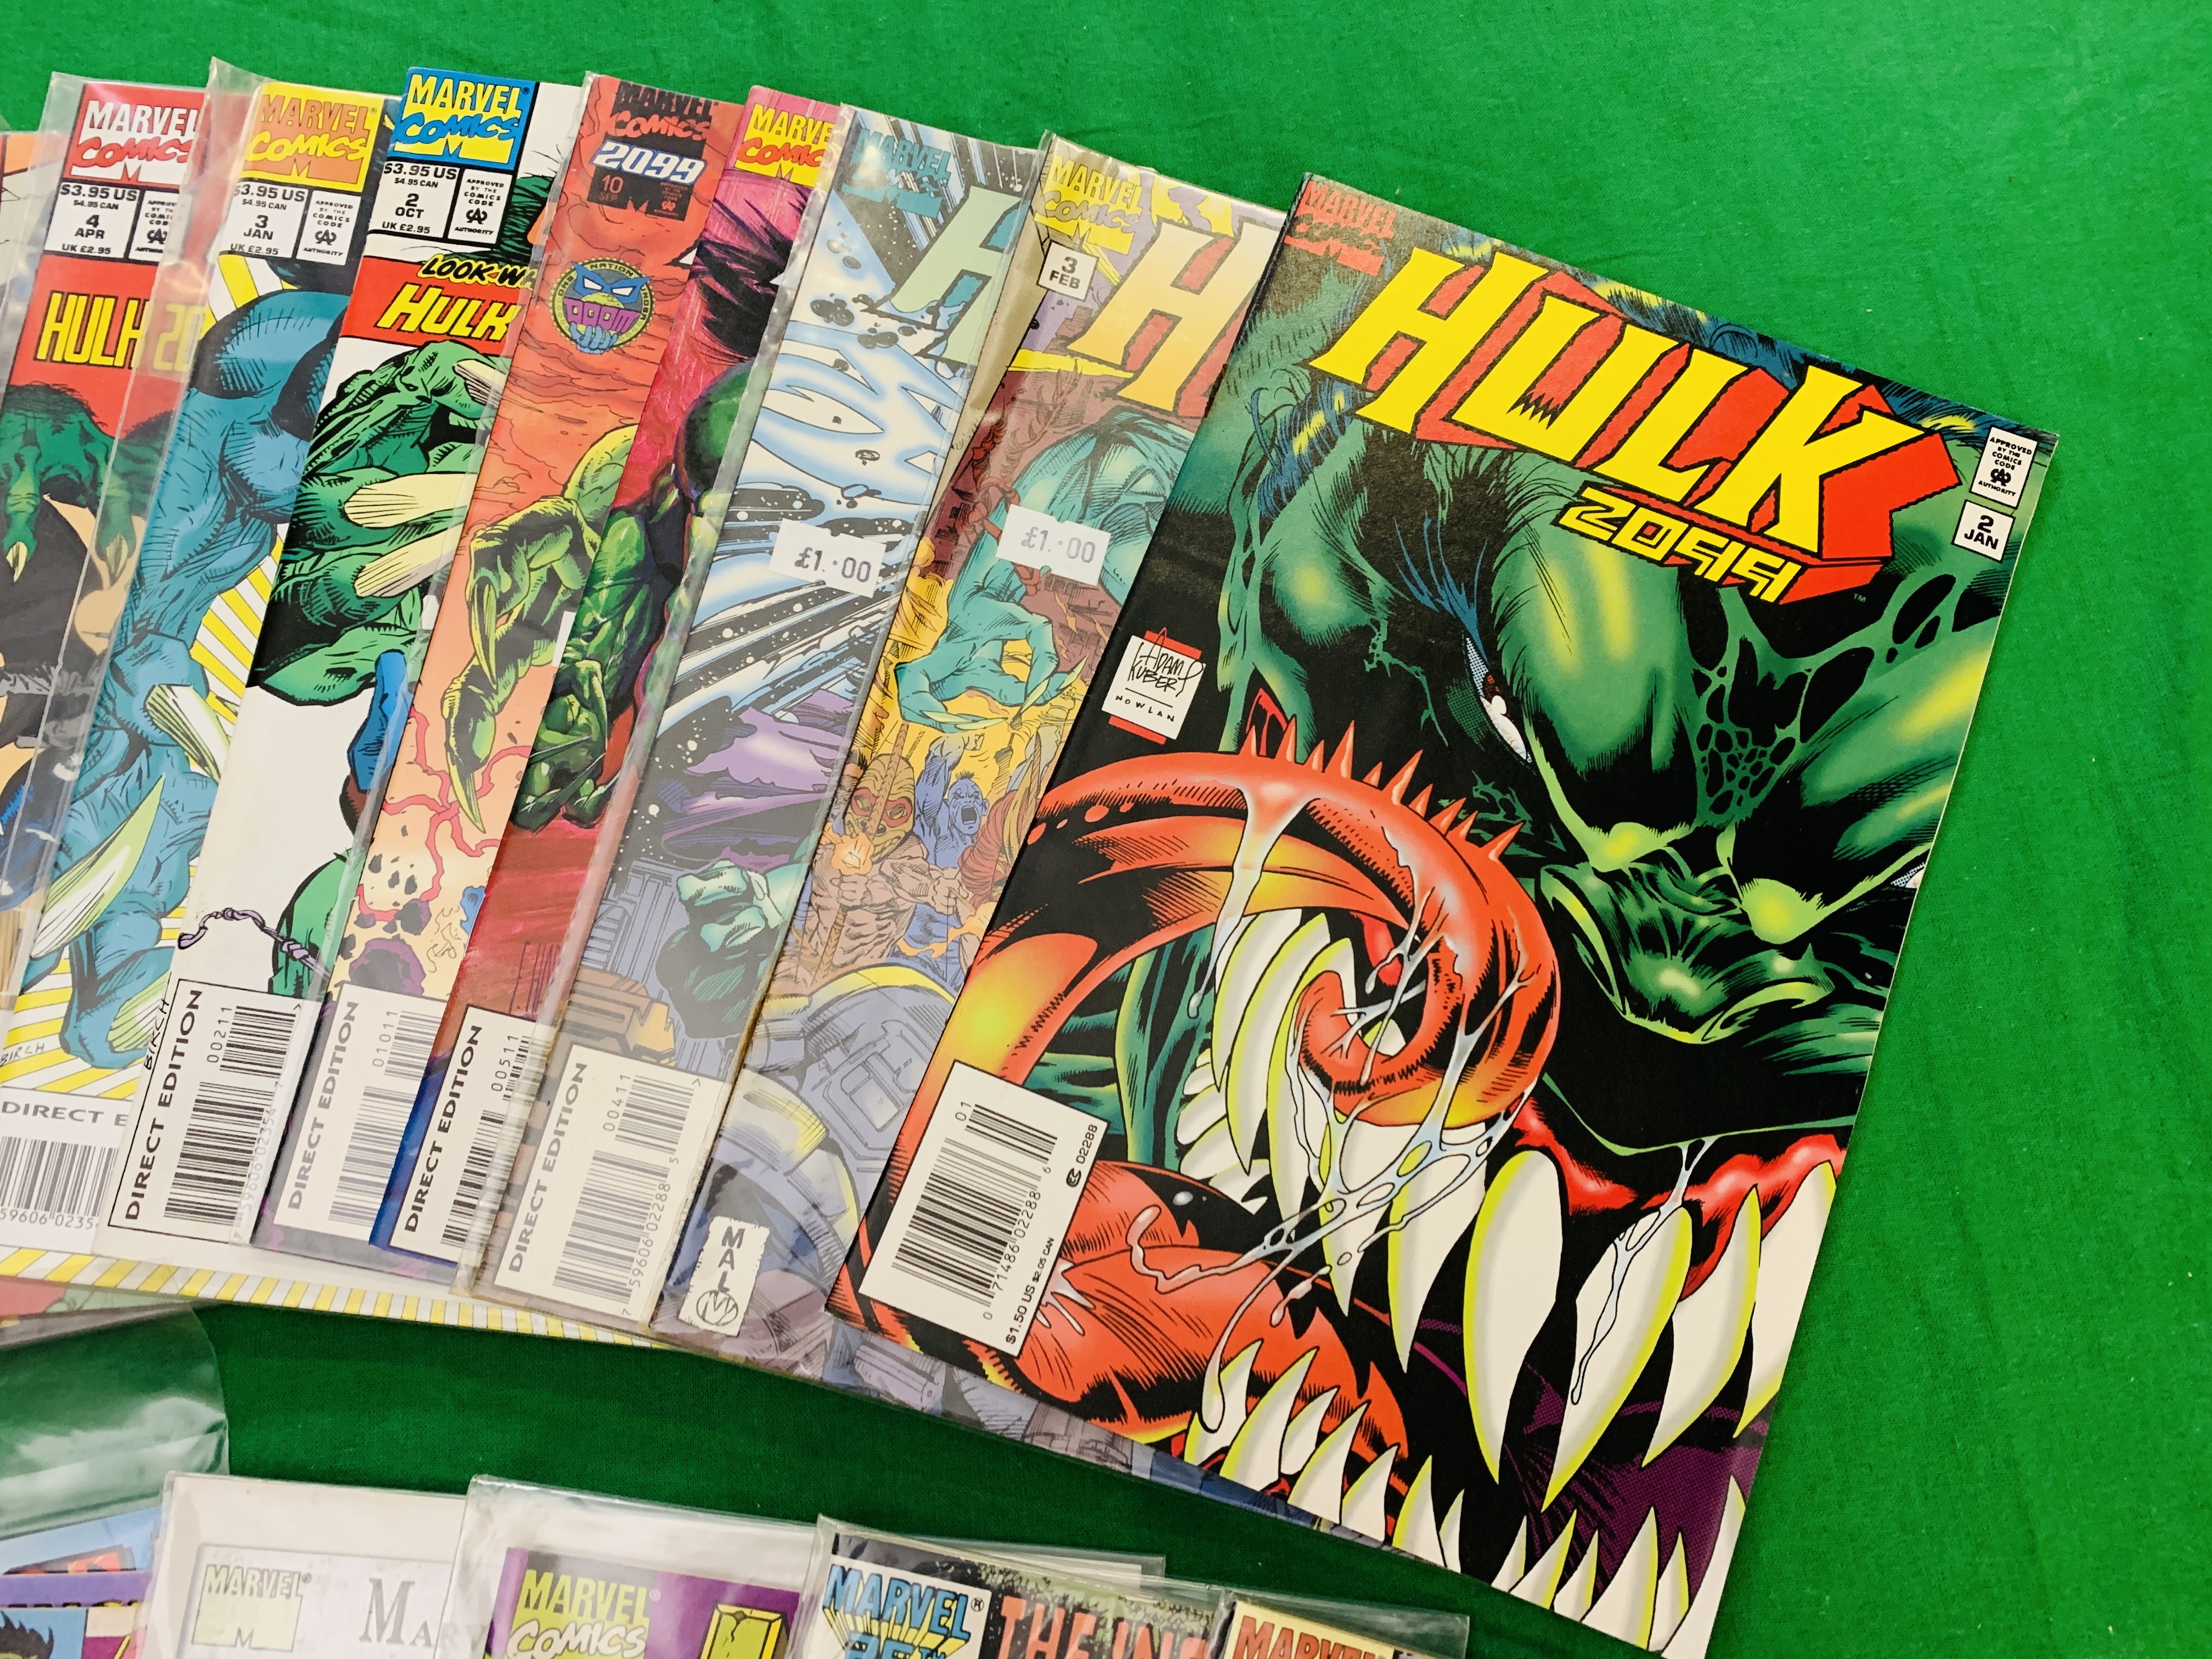 COLLECTION OF HULK MARVEL COMICS: HULK 2099 NO. 1 - 5, 10 FROM 1994. NO. 2 - 4 HAVE RUSTY STAPLES. - Image 3 of 5